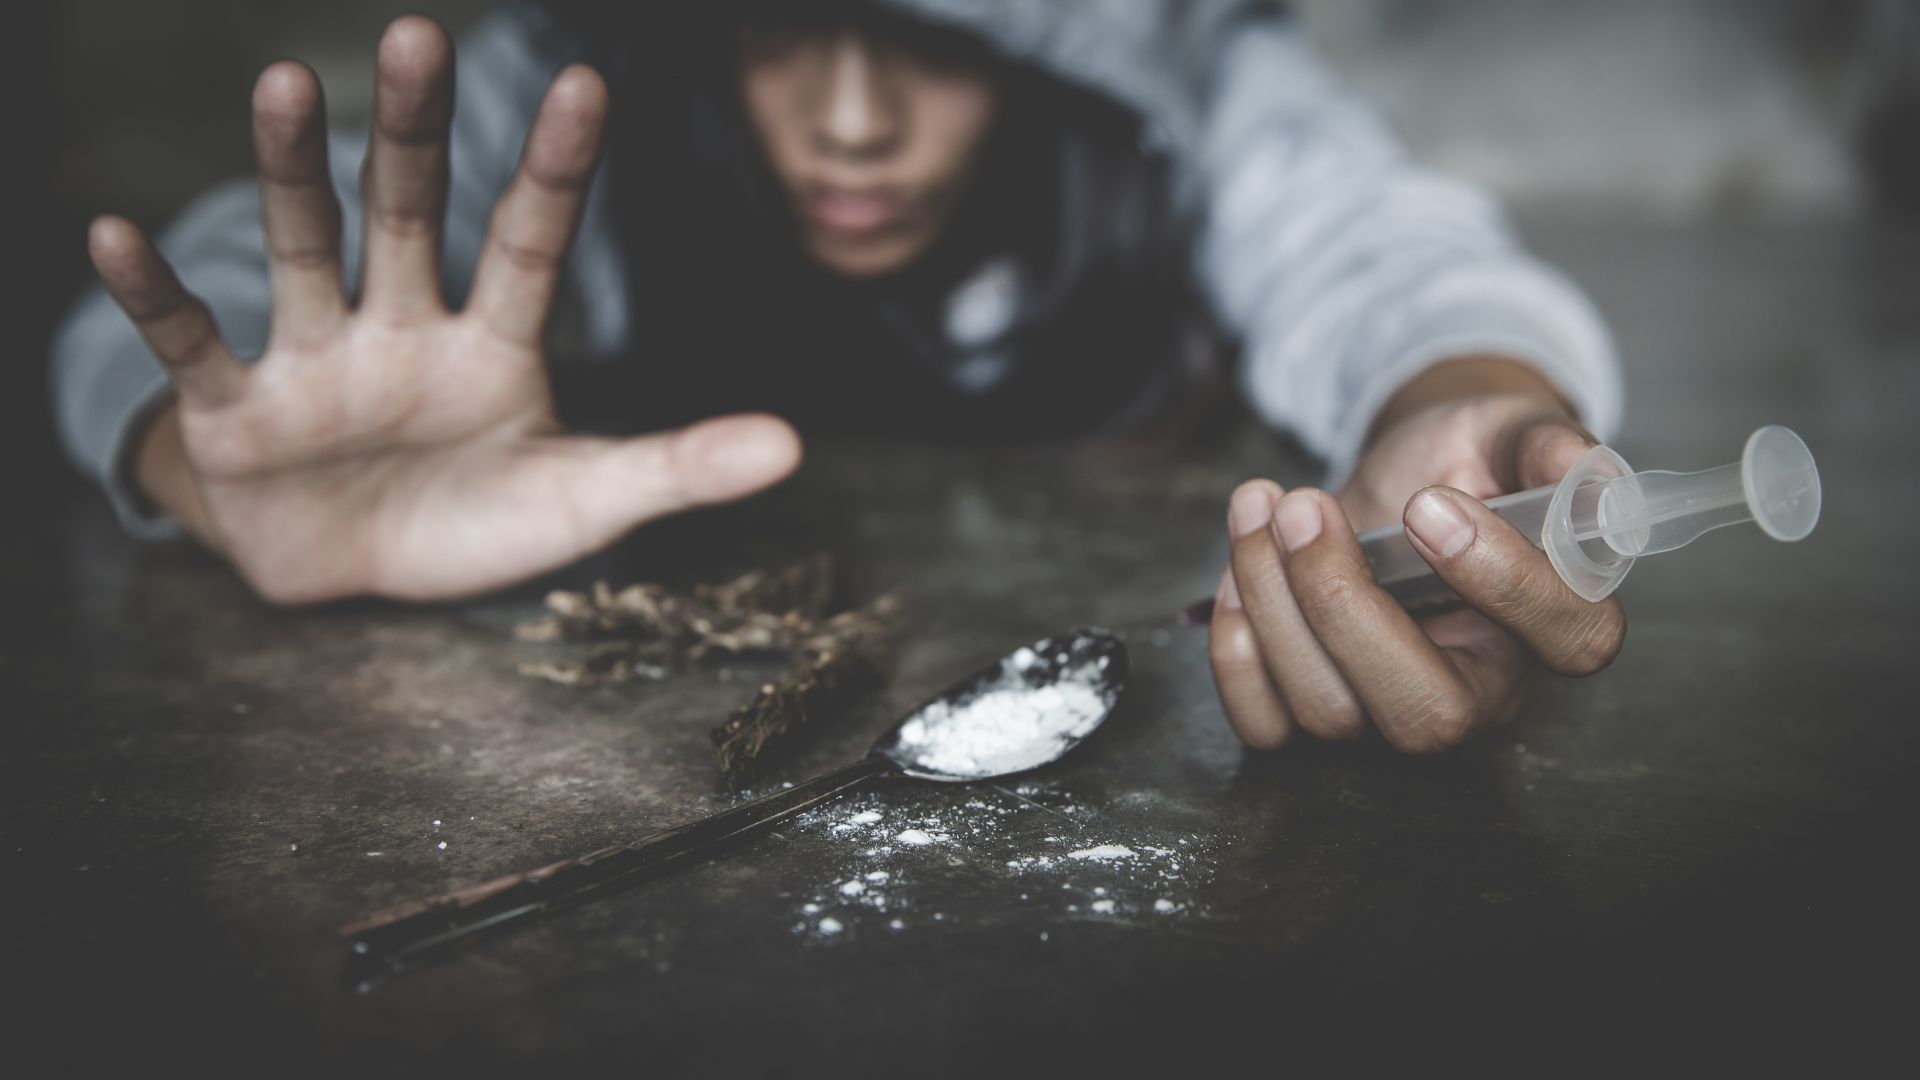 Narcotics and their impact on the Community